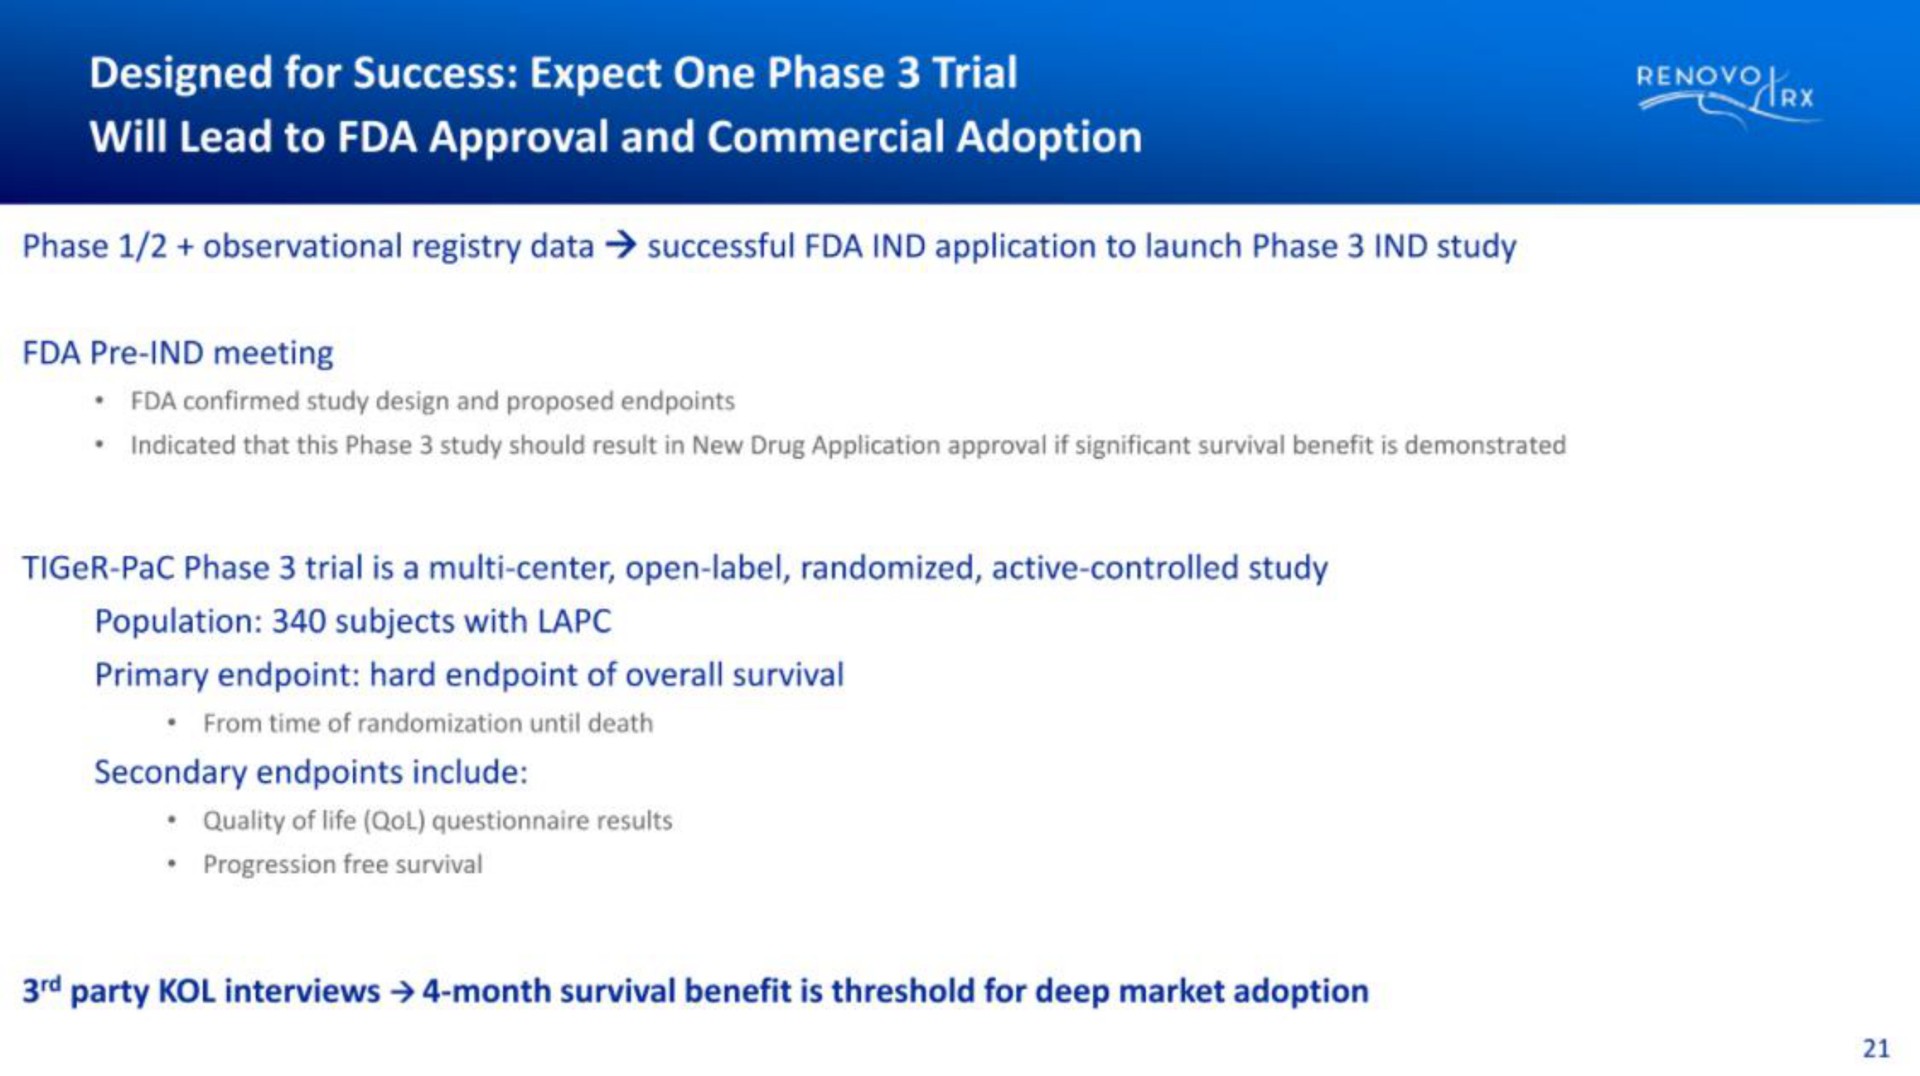 designed for success expect one phase trial will lead to approval and commercial adoption | RenovoRx